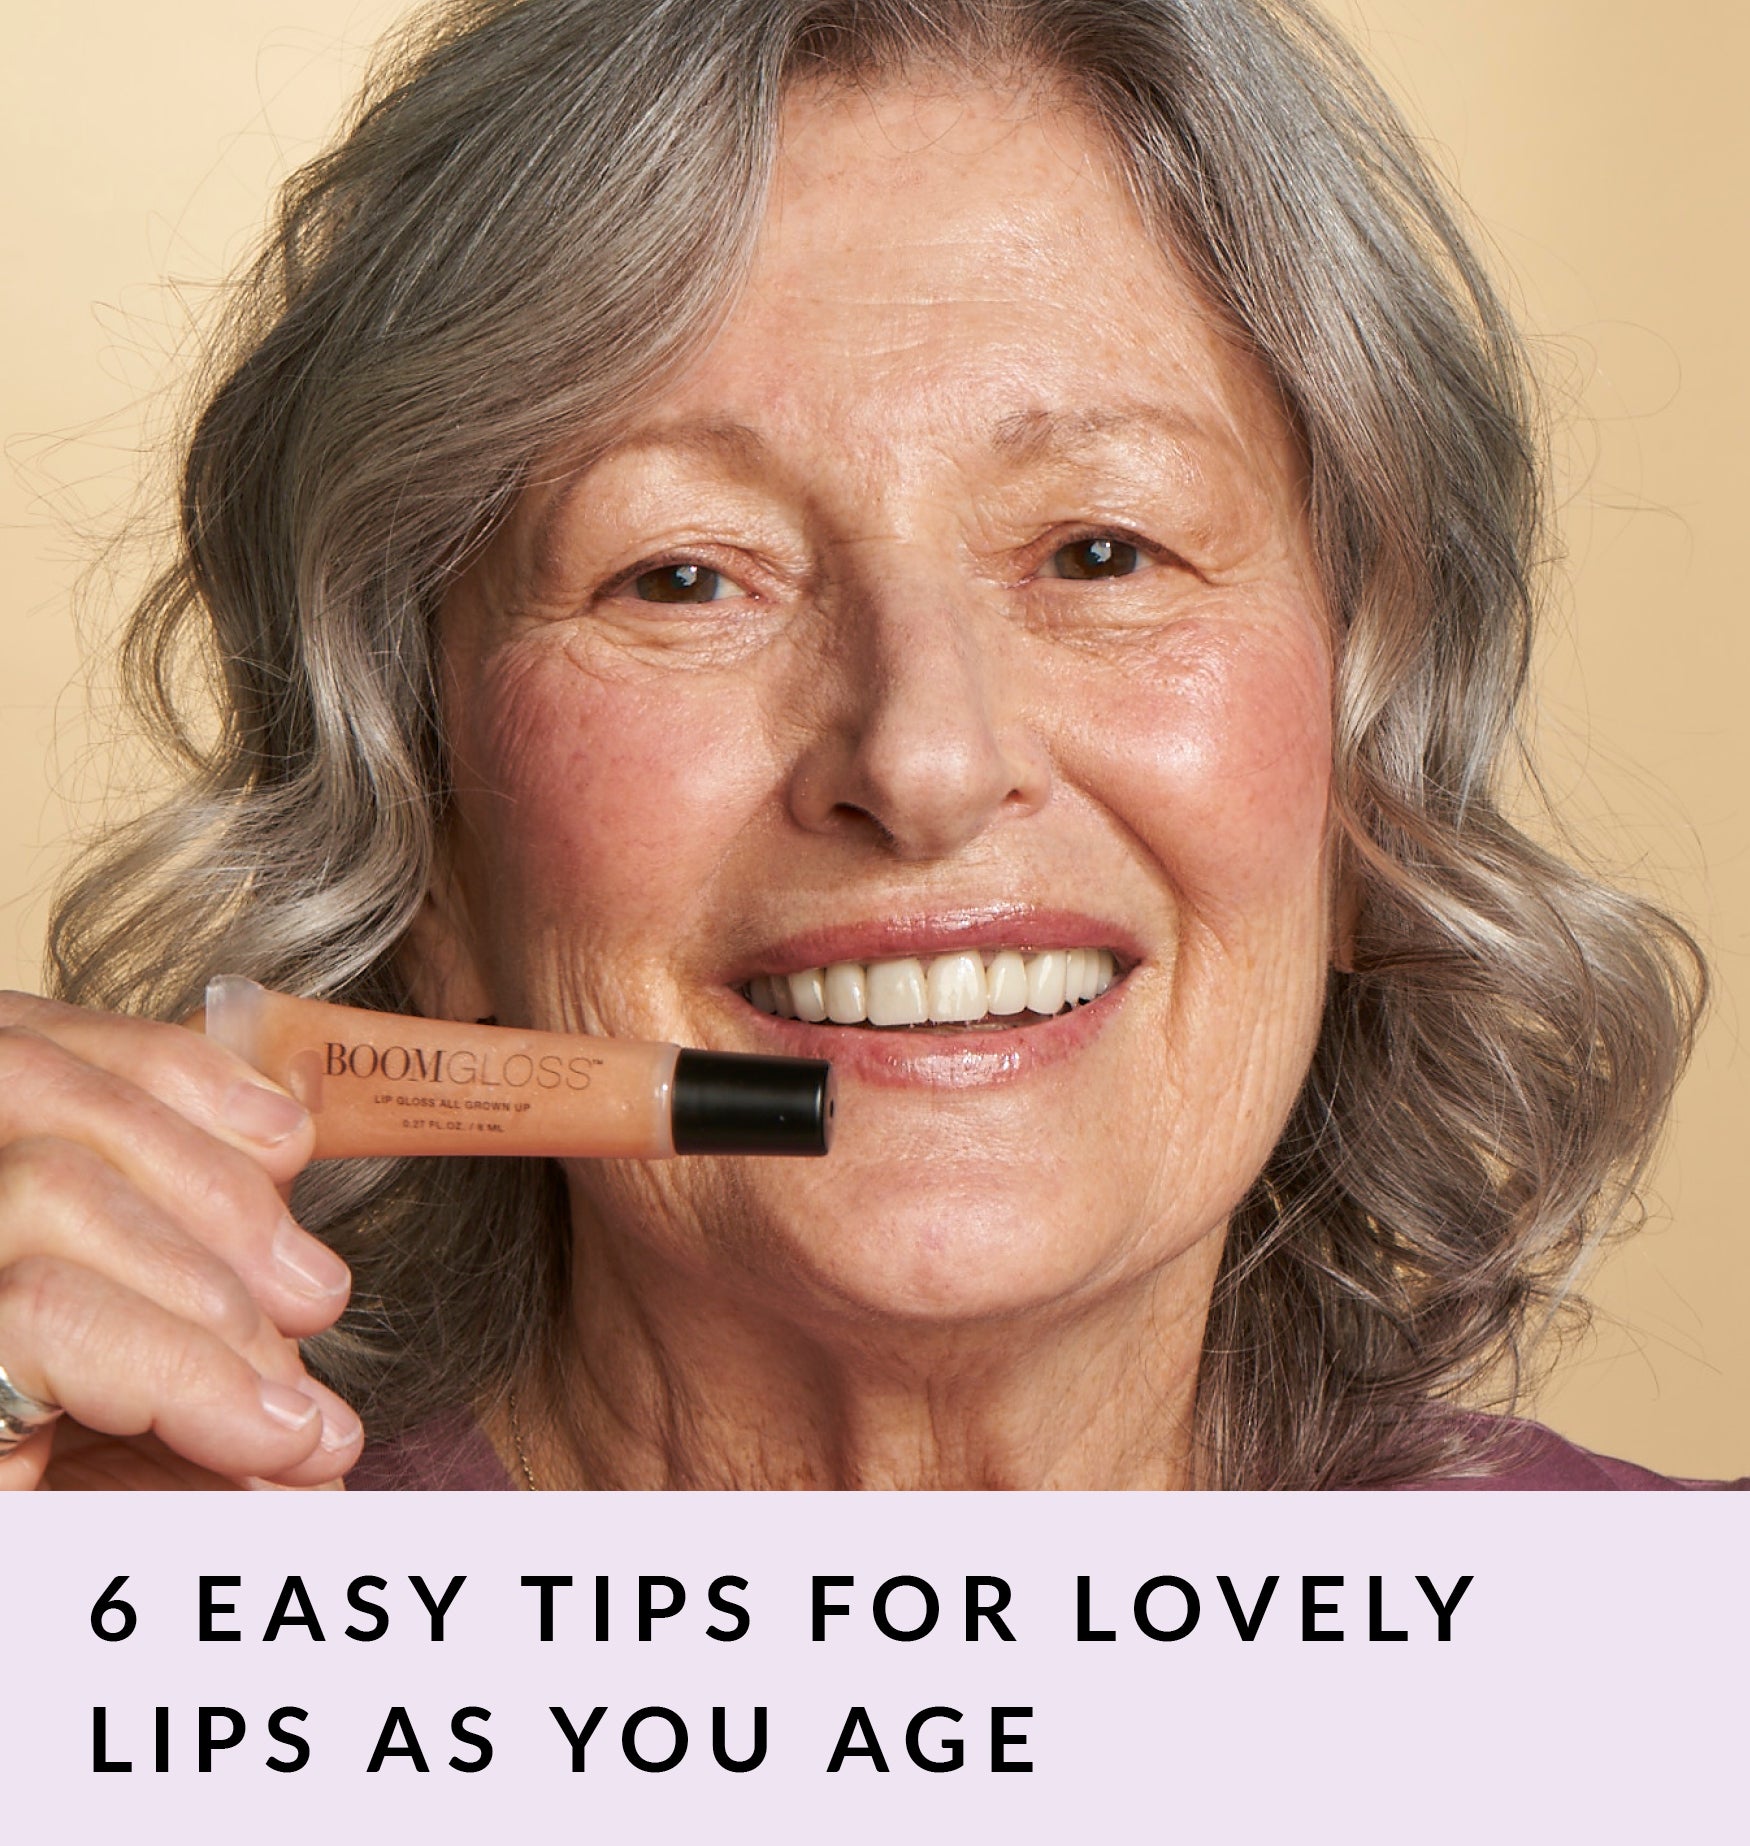 Copy of 6 Easy Tips for Lovely Lips After 50